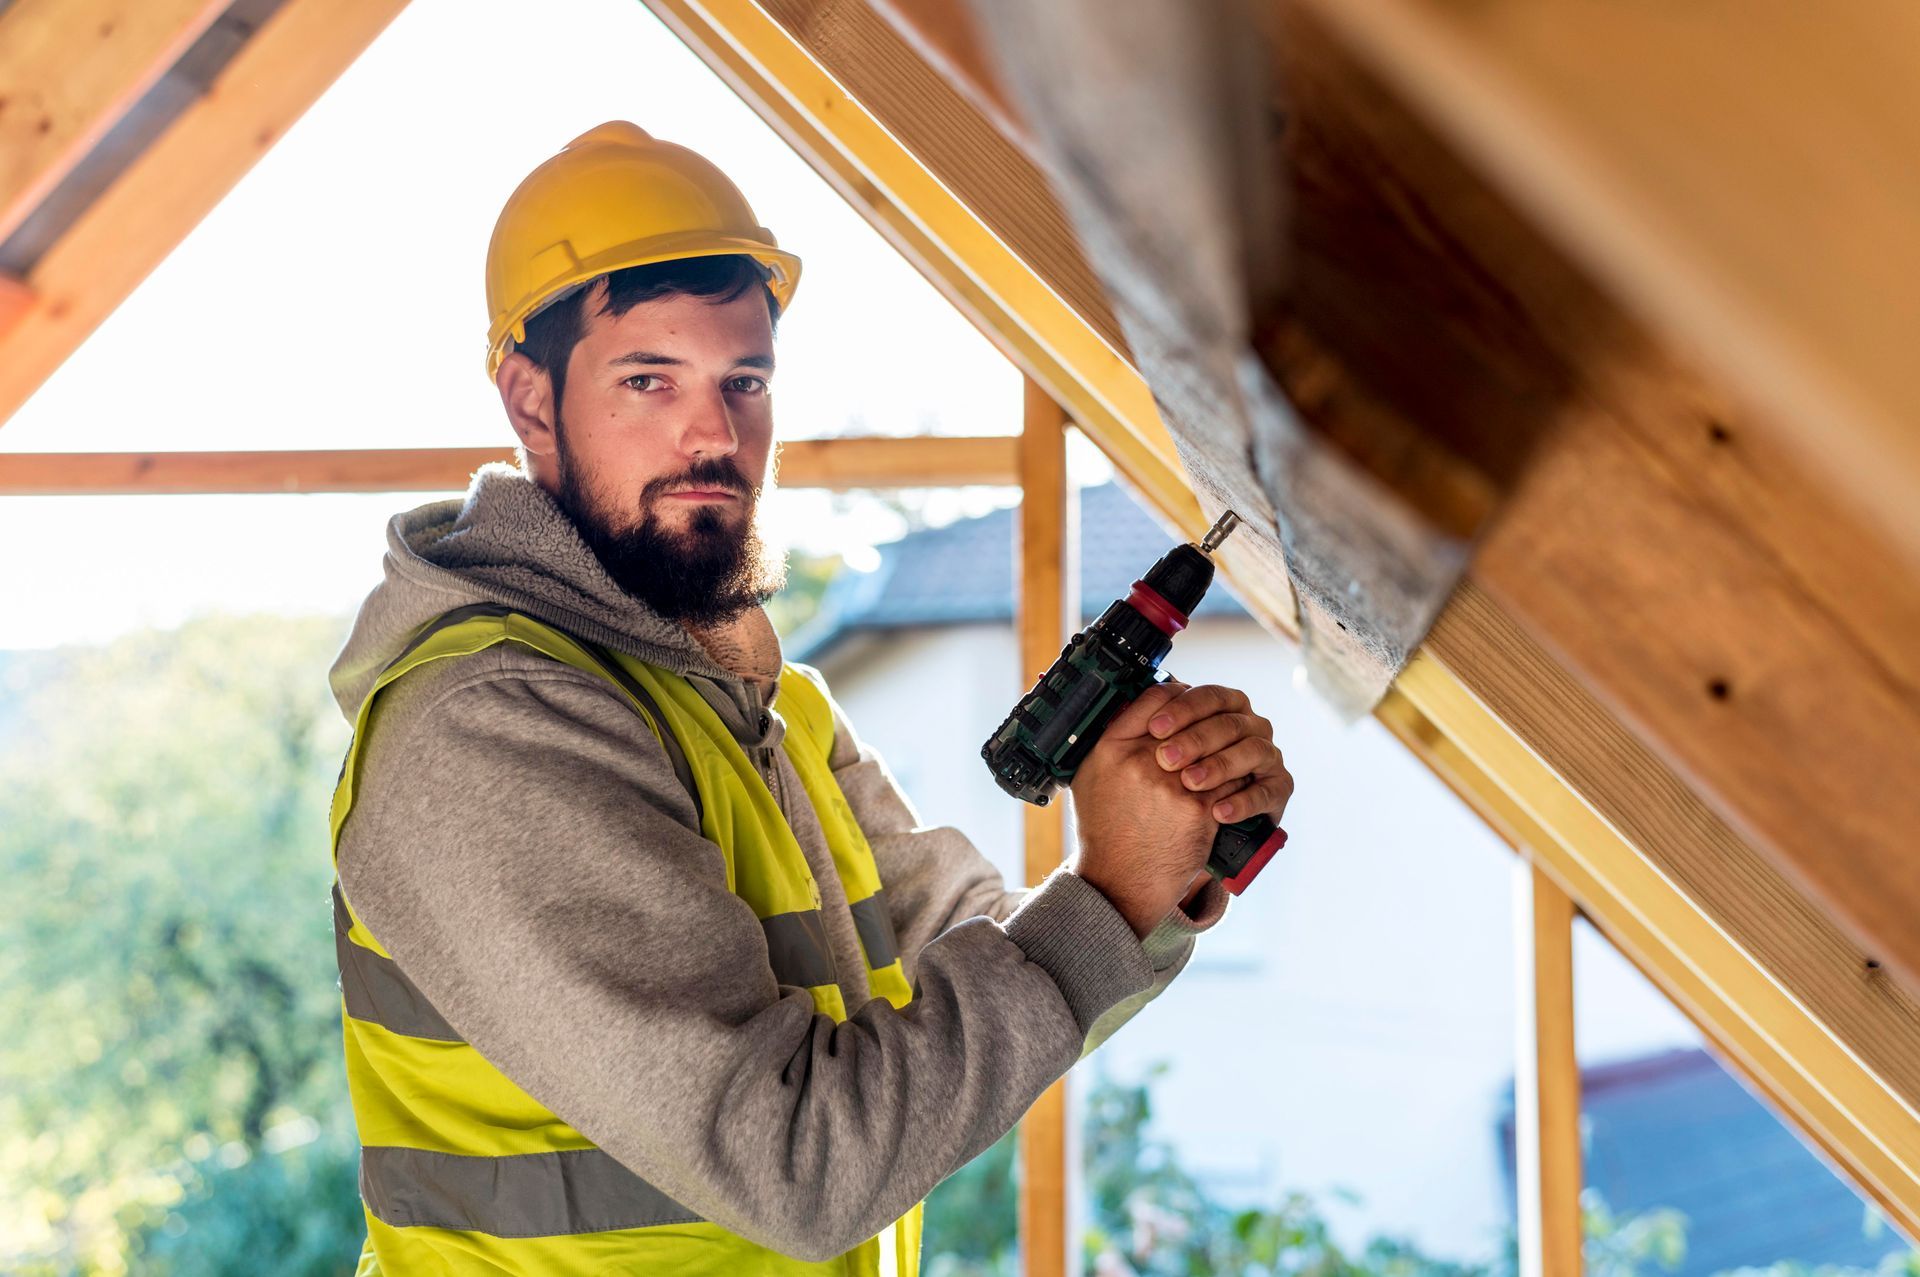 a man is using a drill on a wooden roof .